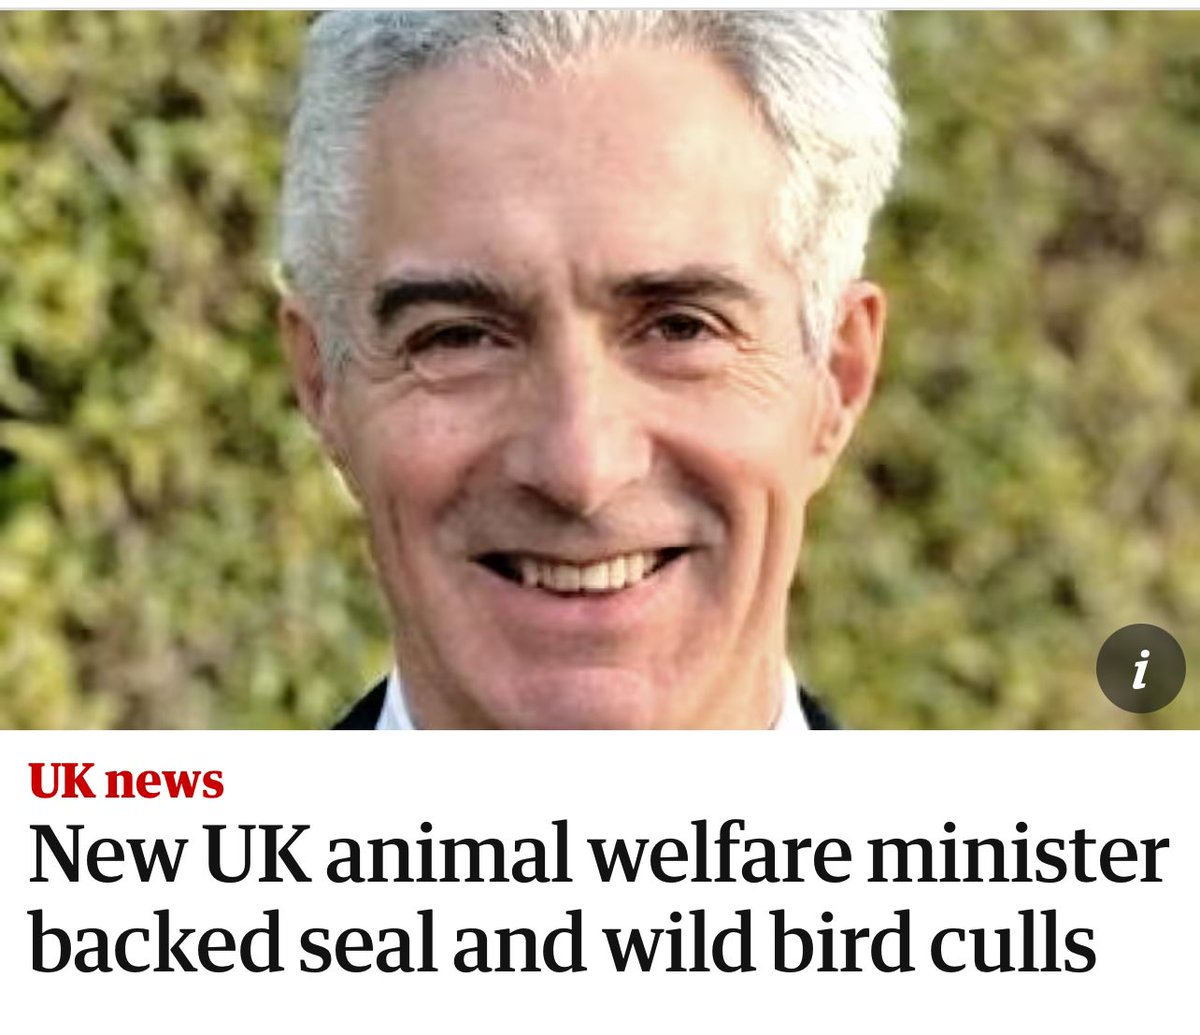 Utterly ridiculous but totally unsurprising. This Govt couldn’t give a shit about animals or the environment and they’re proving it more and more every passing day.